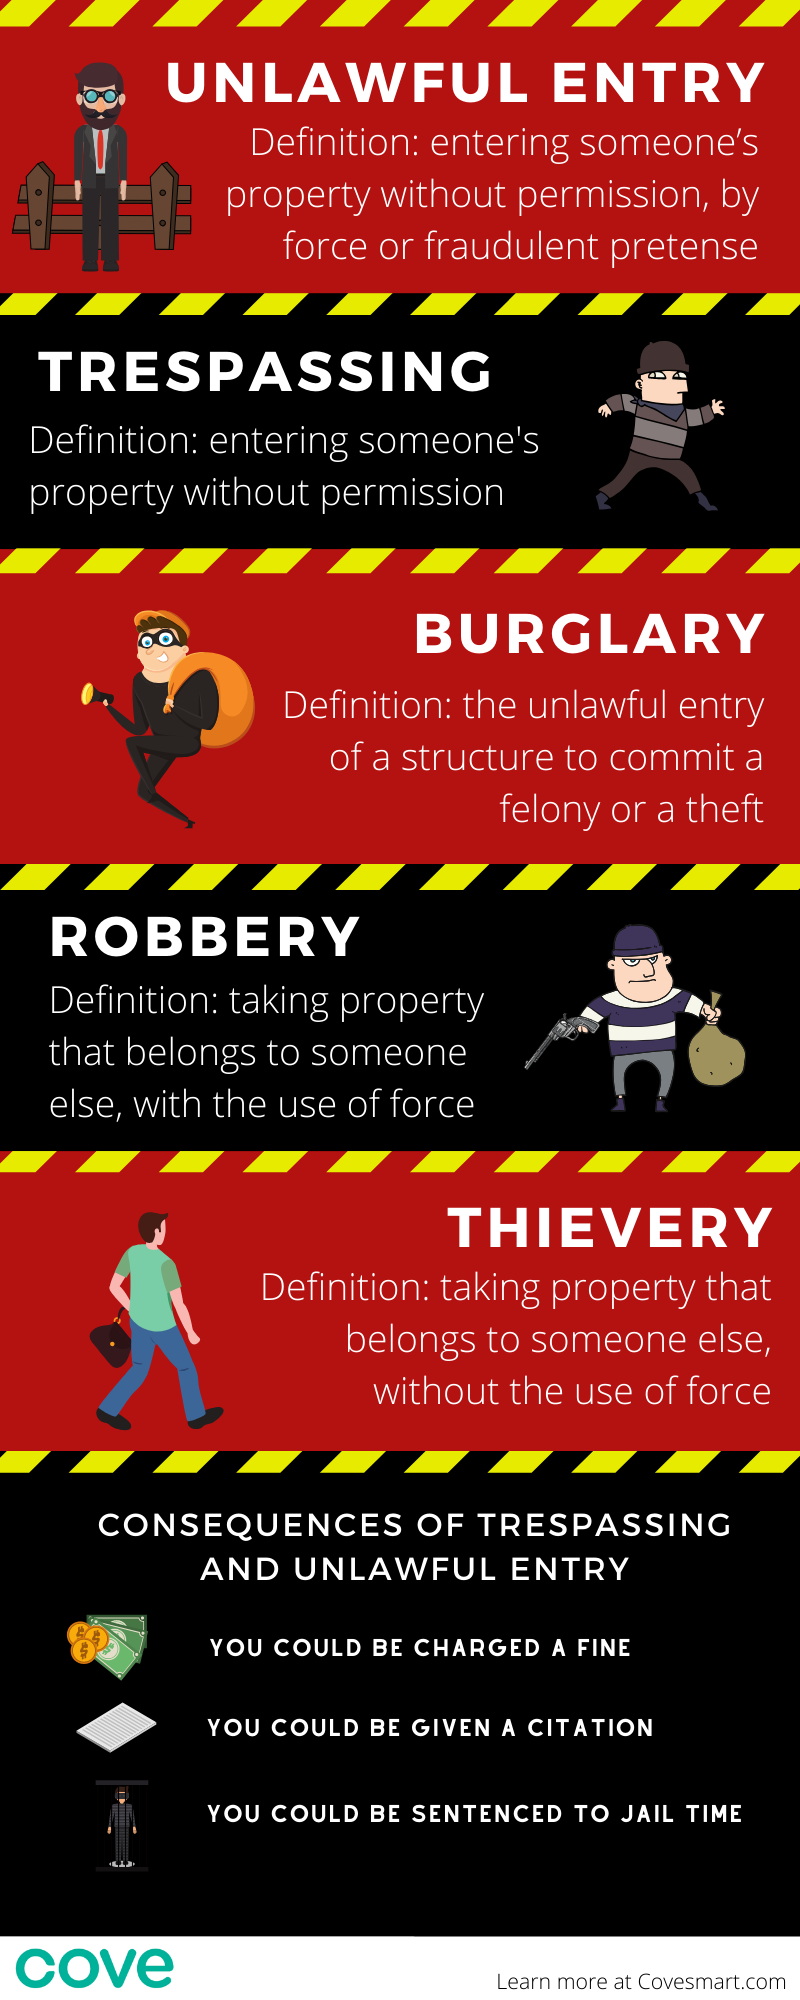 various unsavory characters in the act of unlawful entry, trespassing, burglary, robbery, and thievery and their penalties